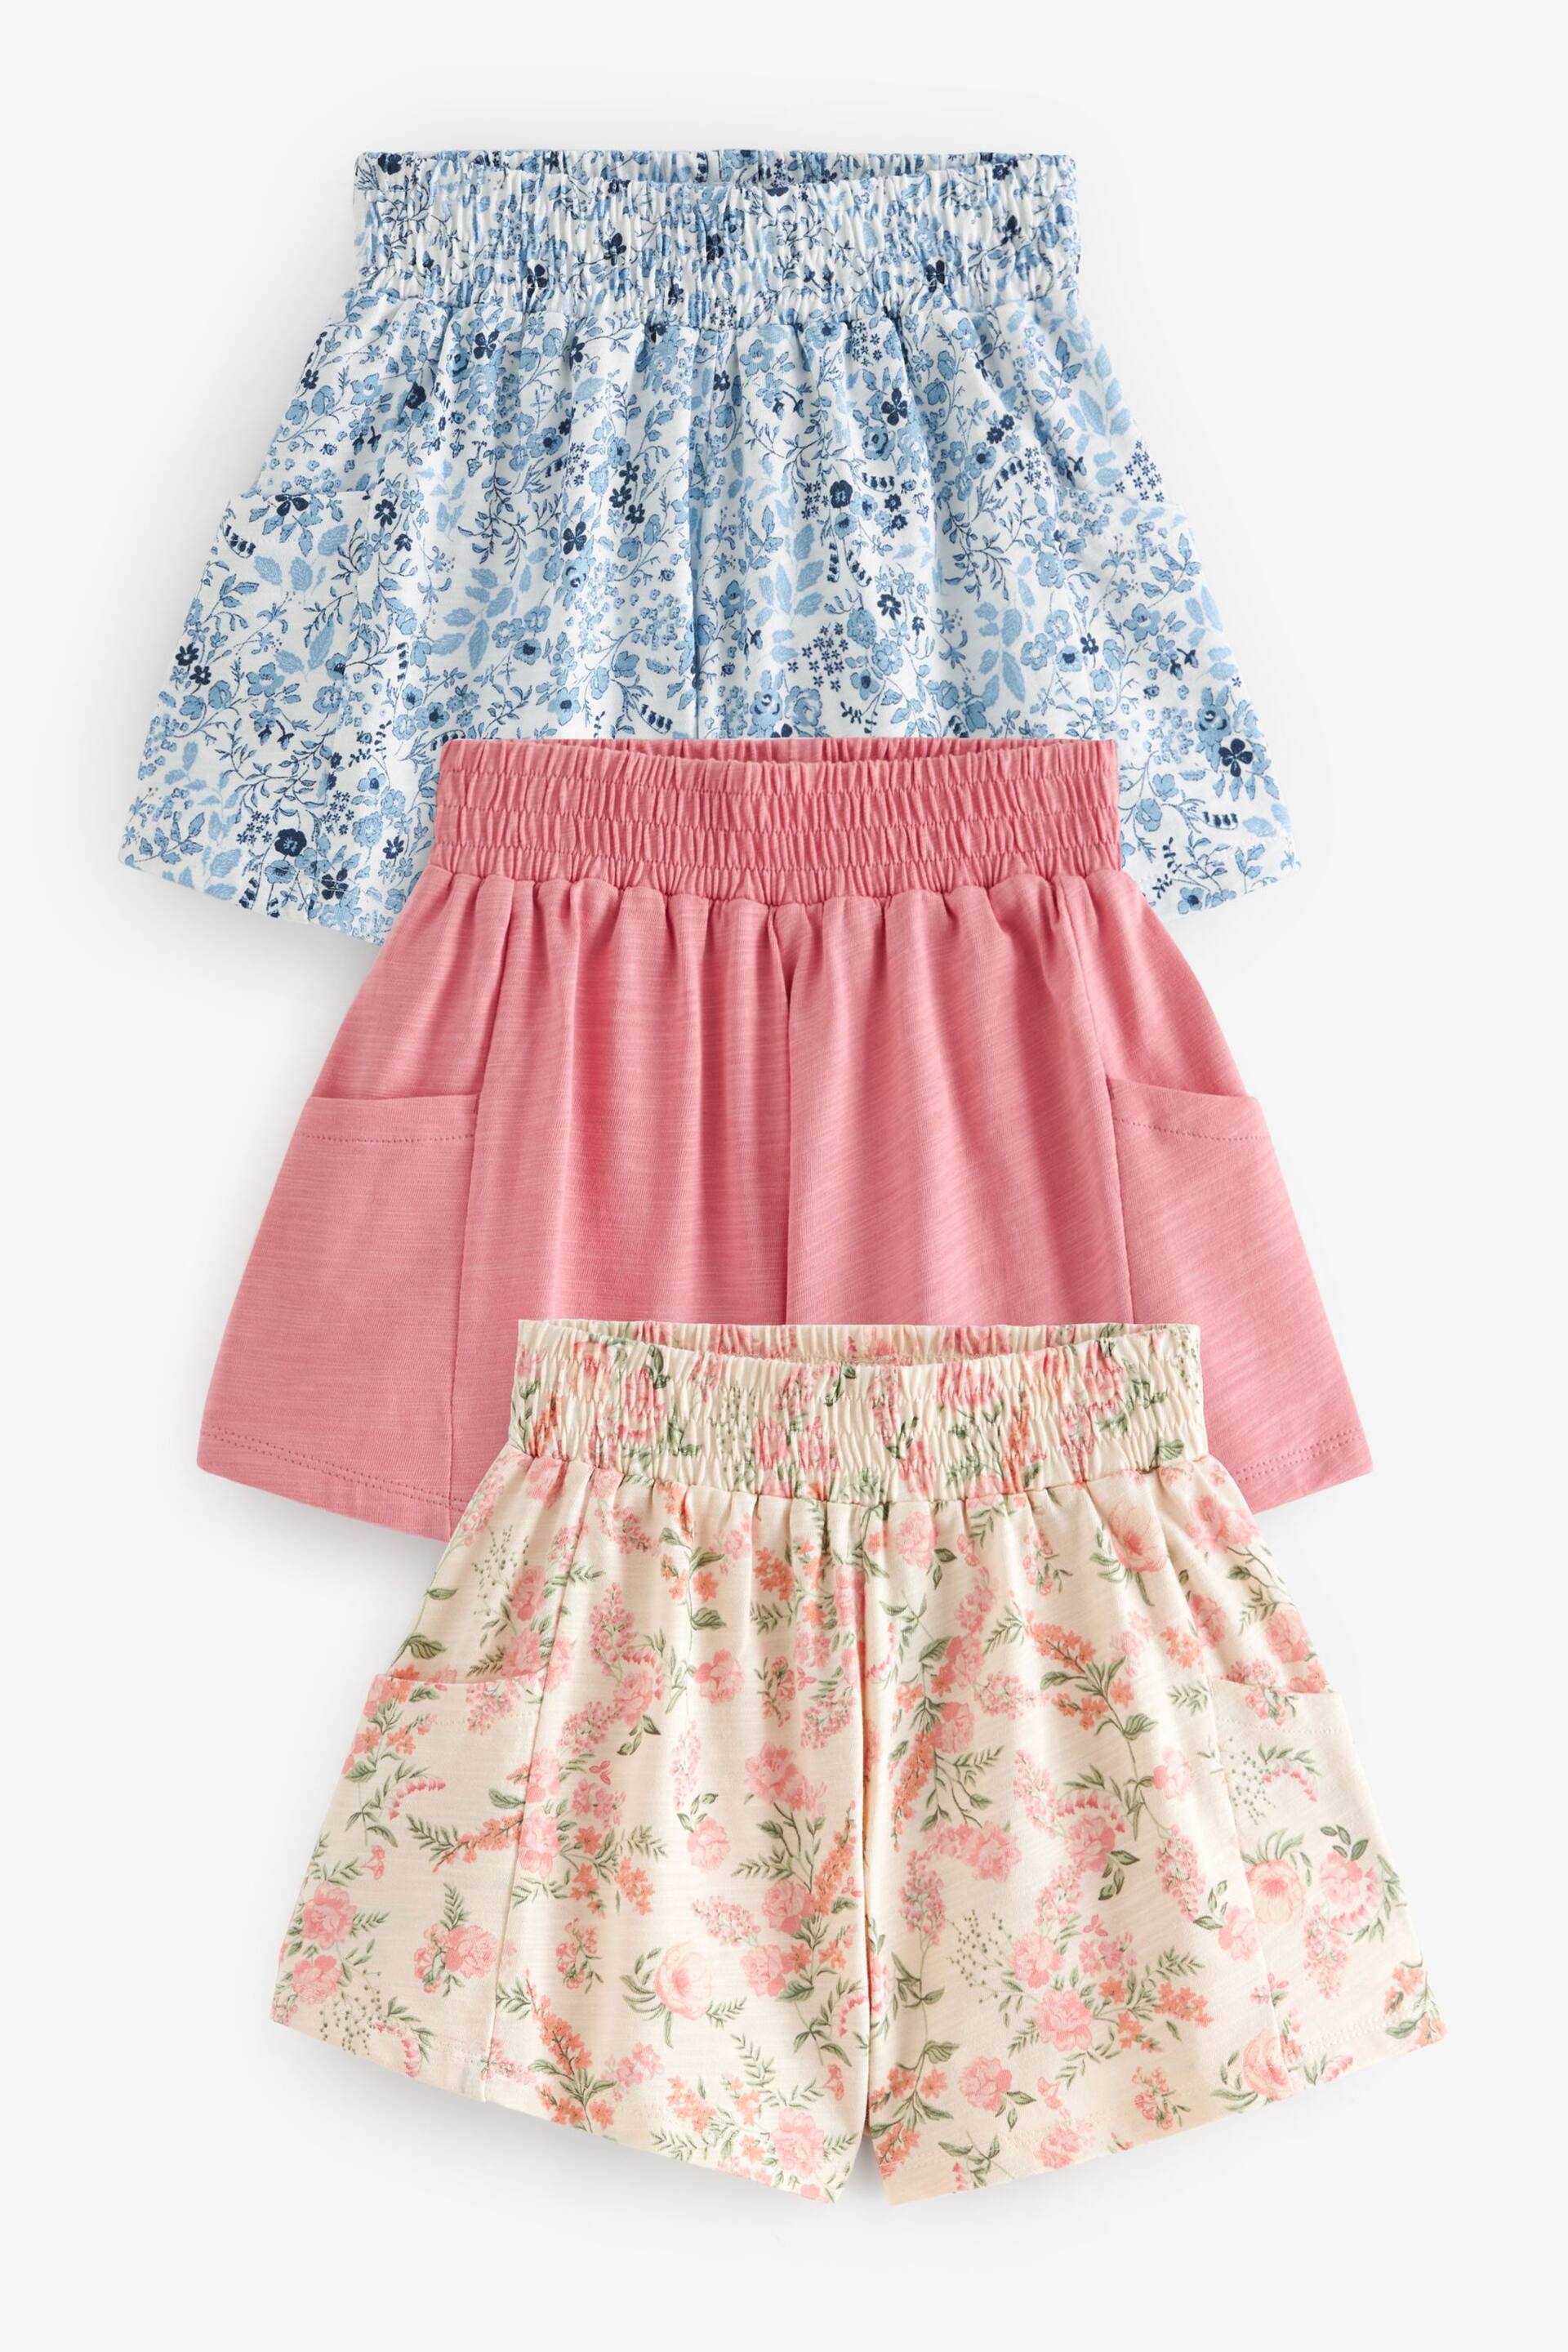 Pink/Ditsy Floral/Blue Floral Shorts 3 Pack (3-16yrs) - Image 1 of 3